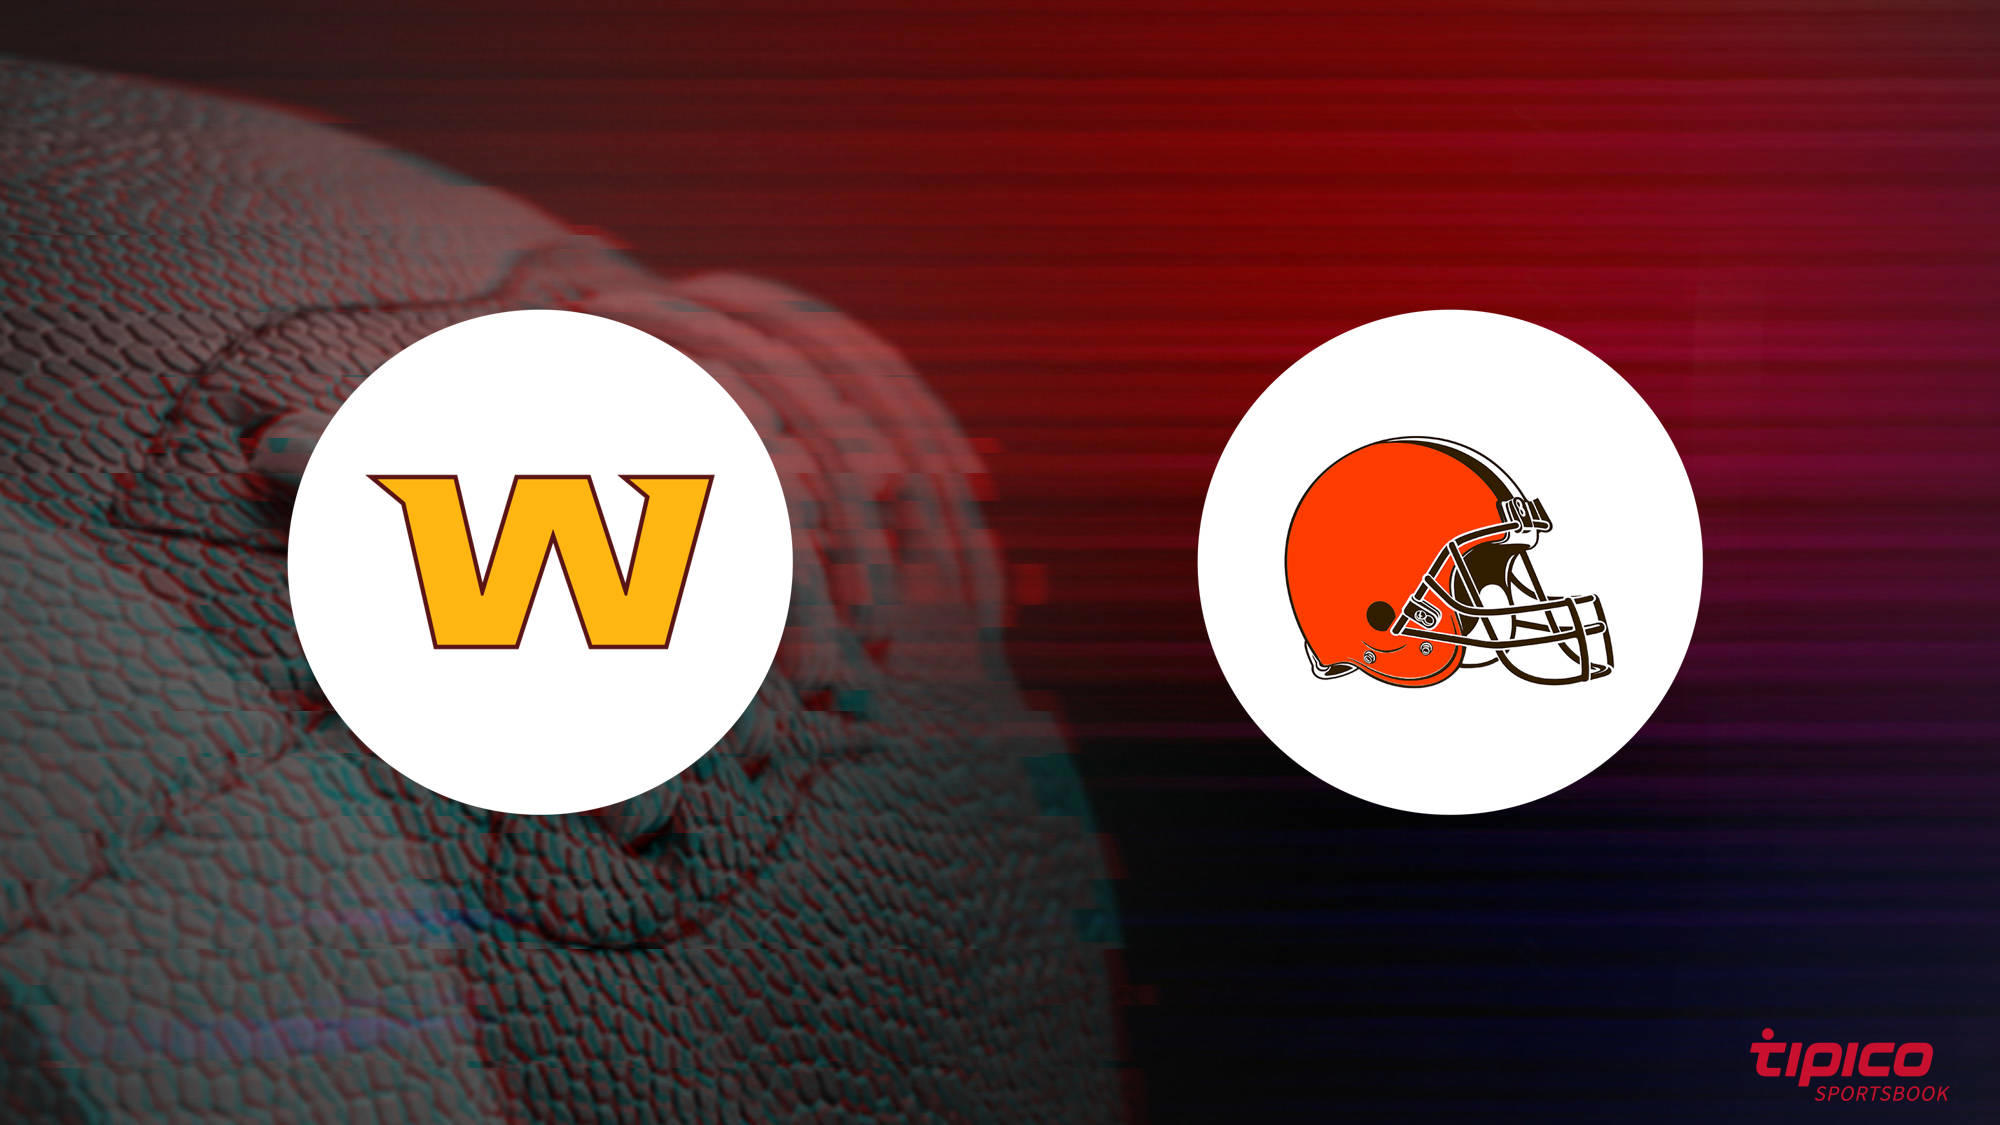 Washington Commanders vs. Cleveland Browns Preview